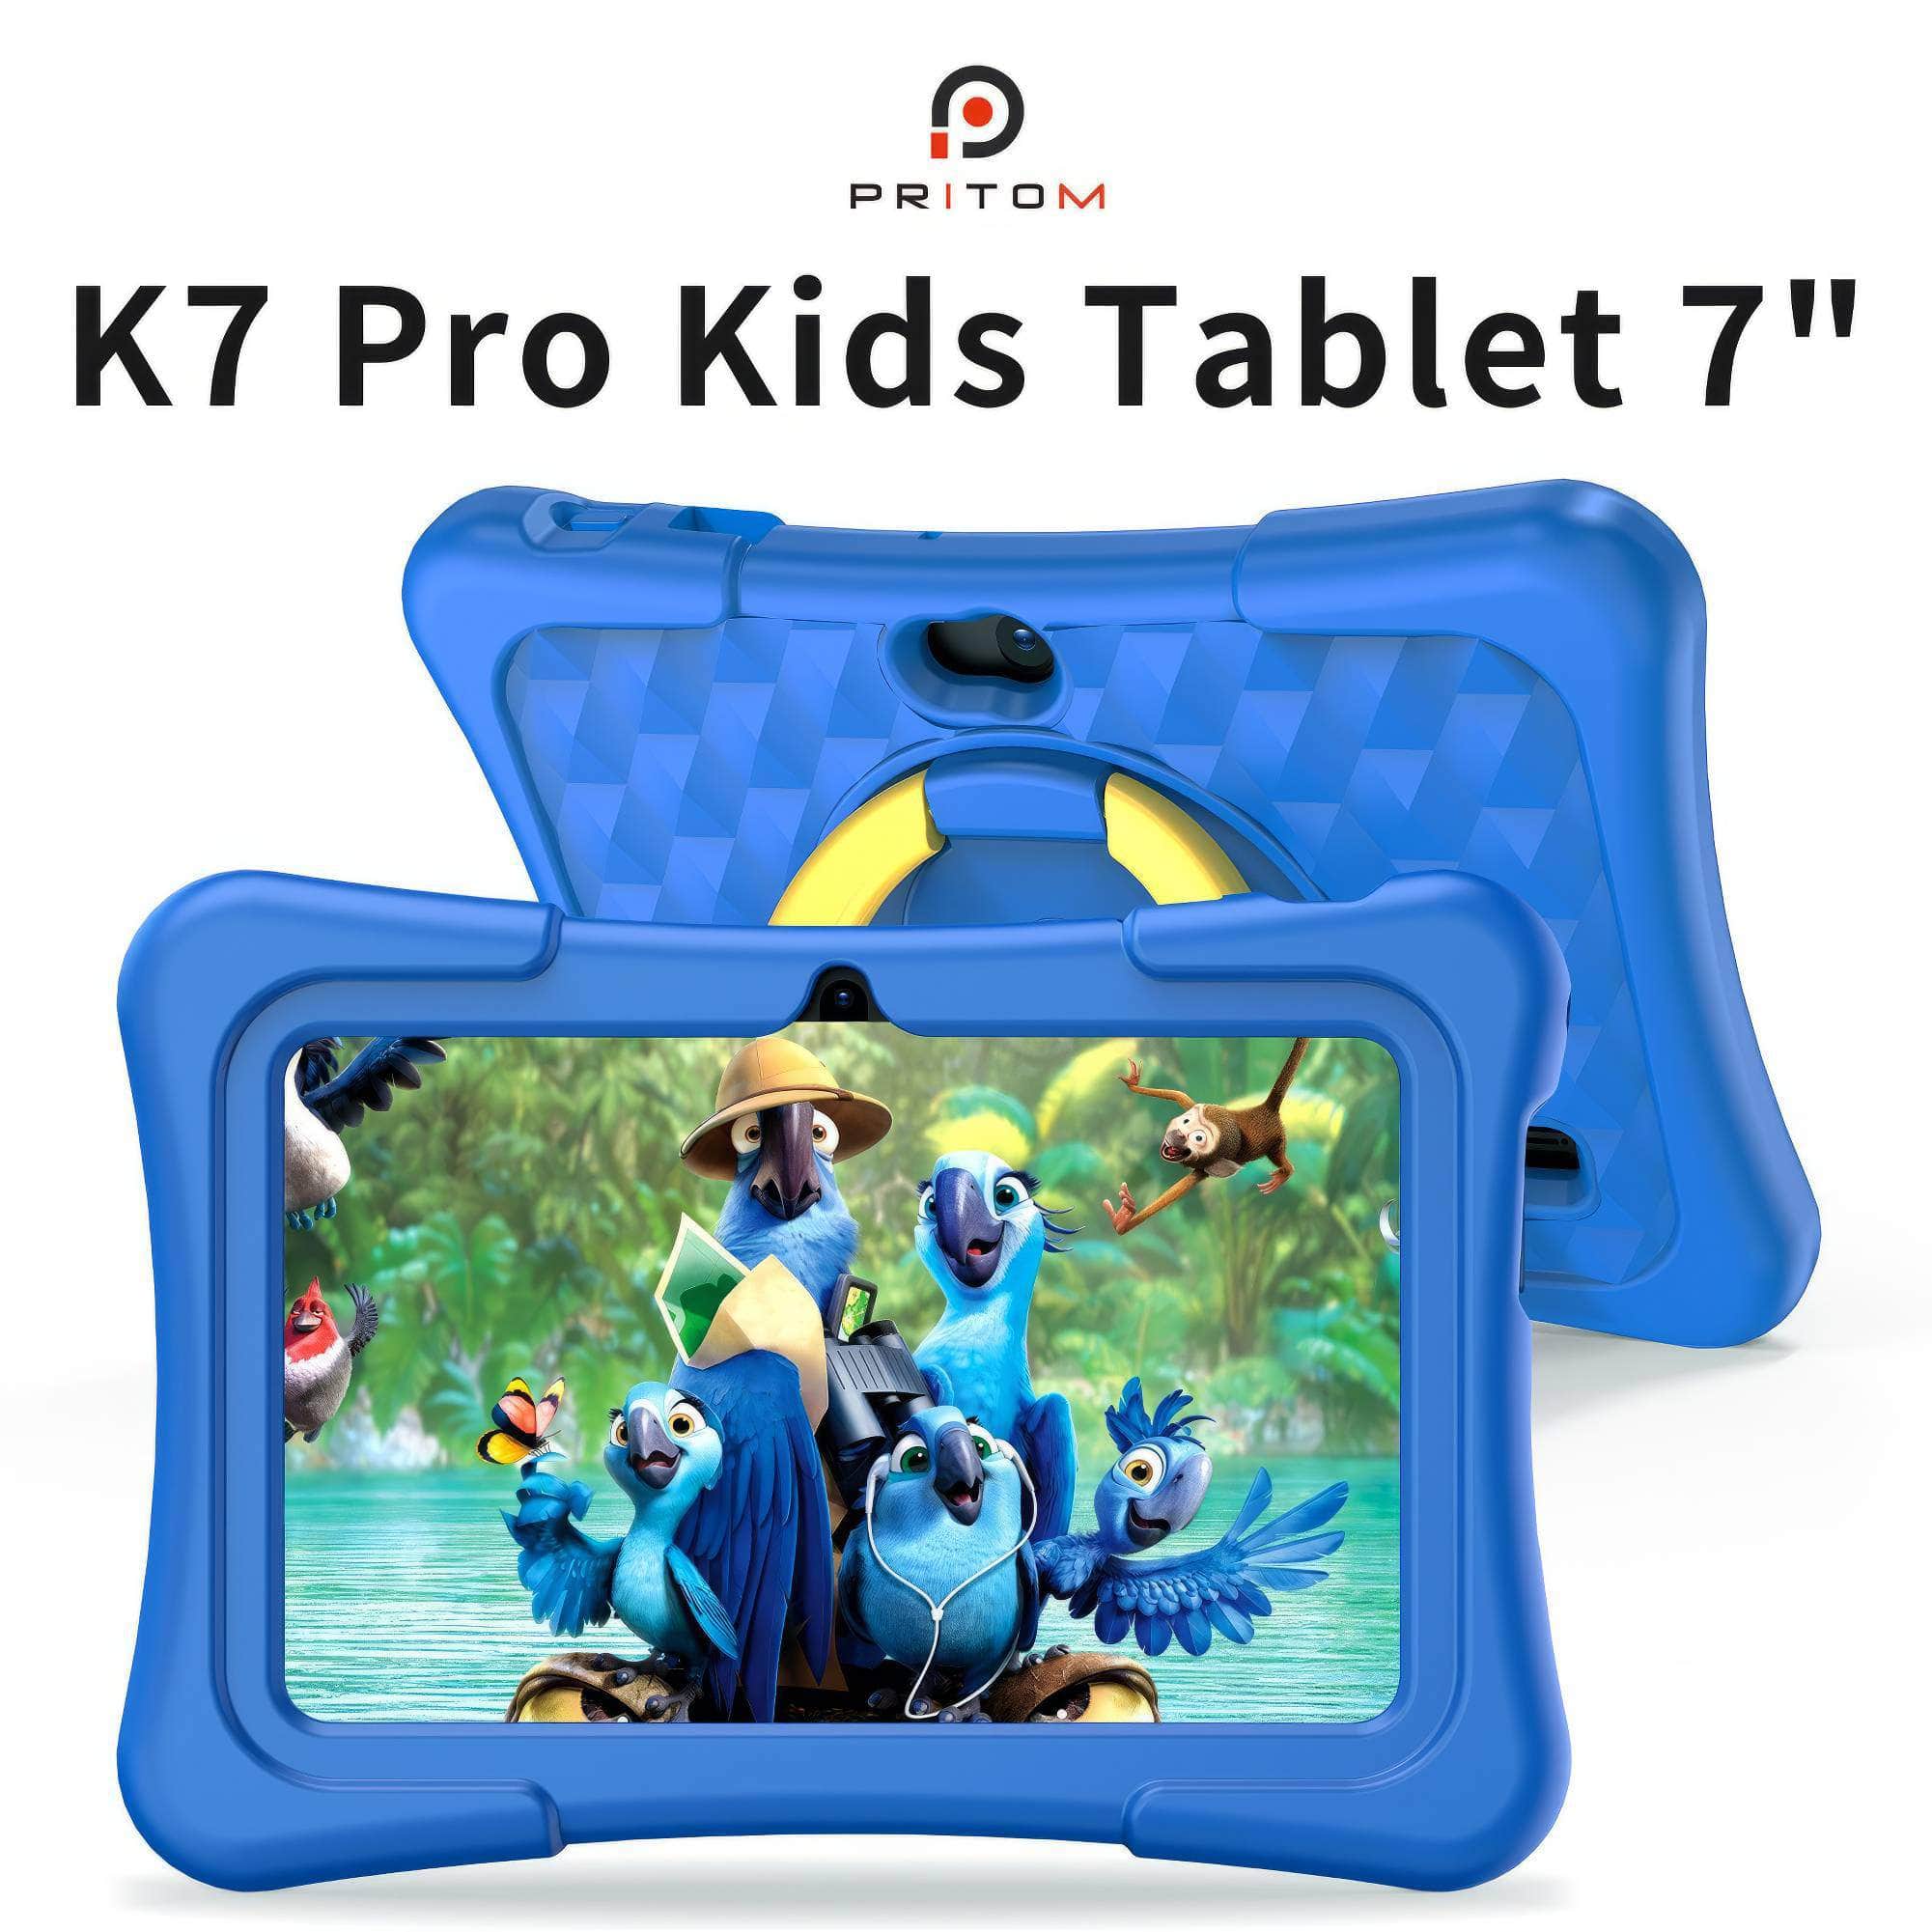 PRITOM Kids Tablet 7 Inch - Android 11, 32GB, WiFi, Bluetooth, Dual Camera, Educational Software Installed with Protective Case